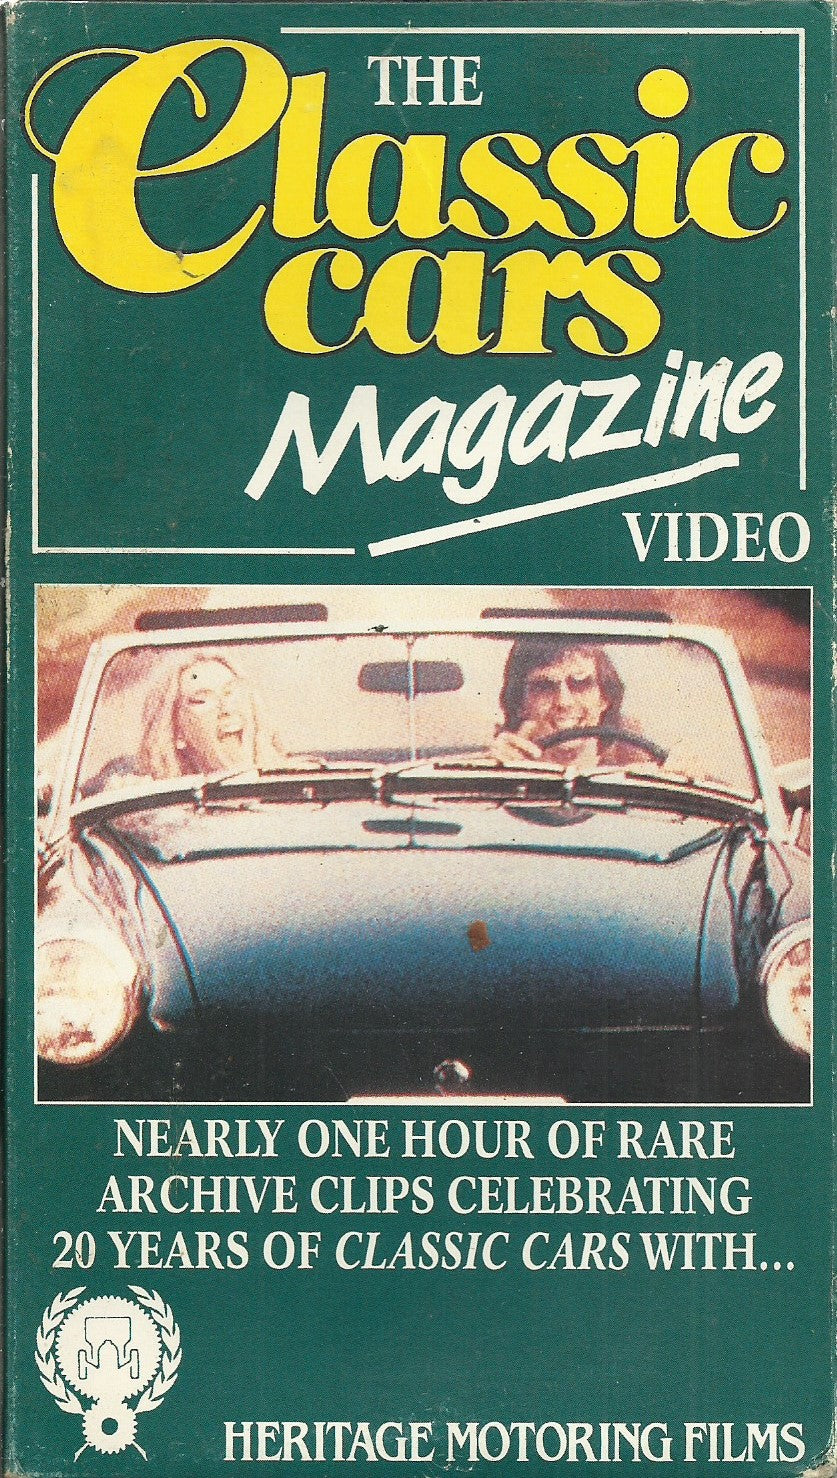 The Classic Cars Magazine Video: Nearly One Hour of Rare Archive Clips Celebrating 20 Years of Classic Cars With... Heritage Motoring Films [VHS]